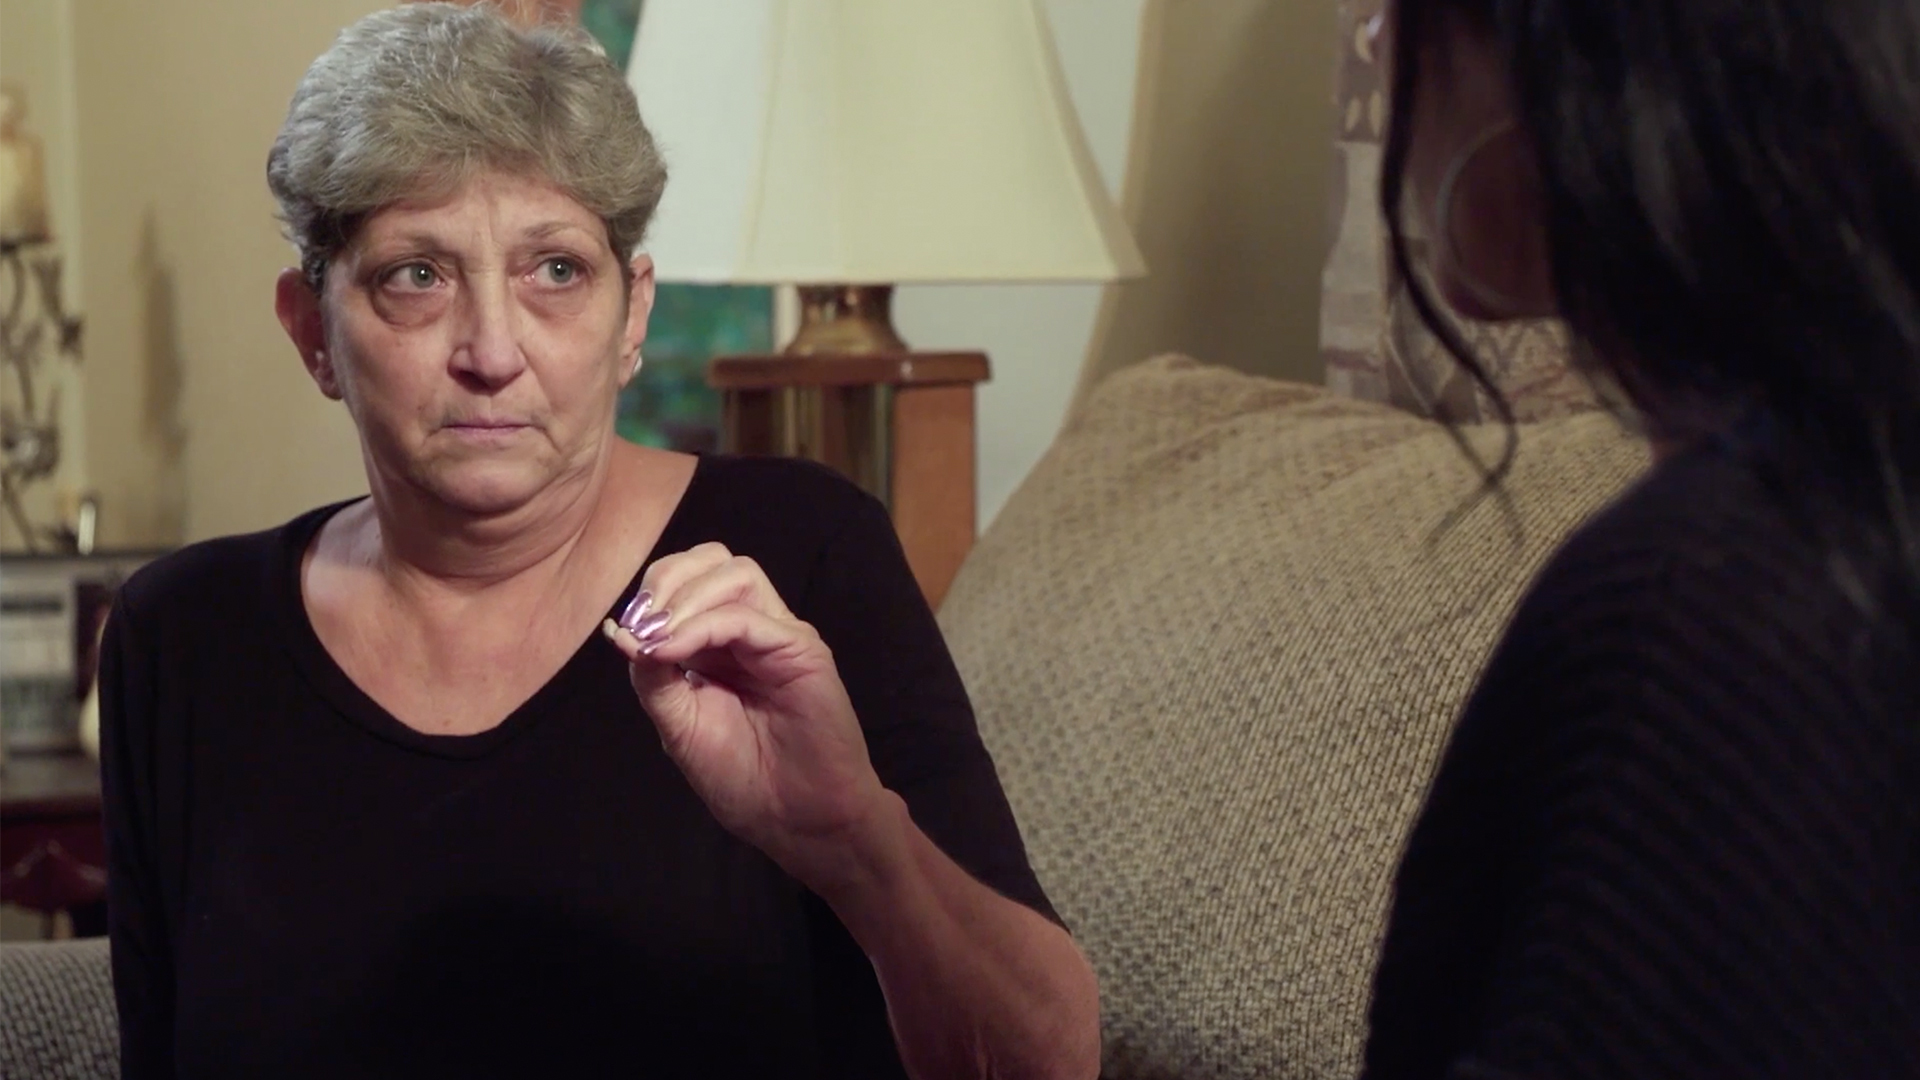 Watch Louie's Mom Puts Melissa in Check | Love During Lockup Video Extras